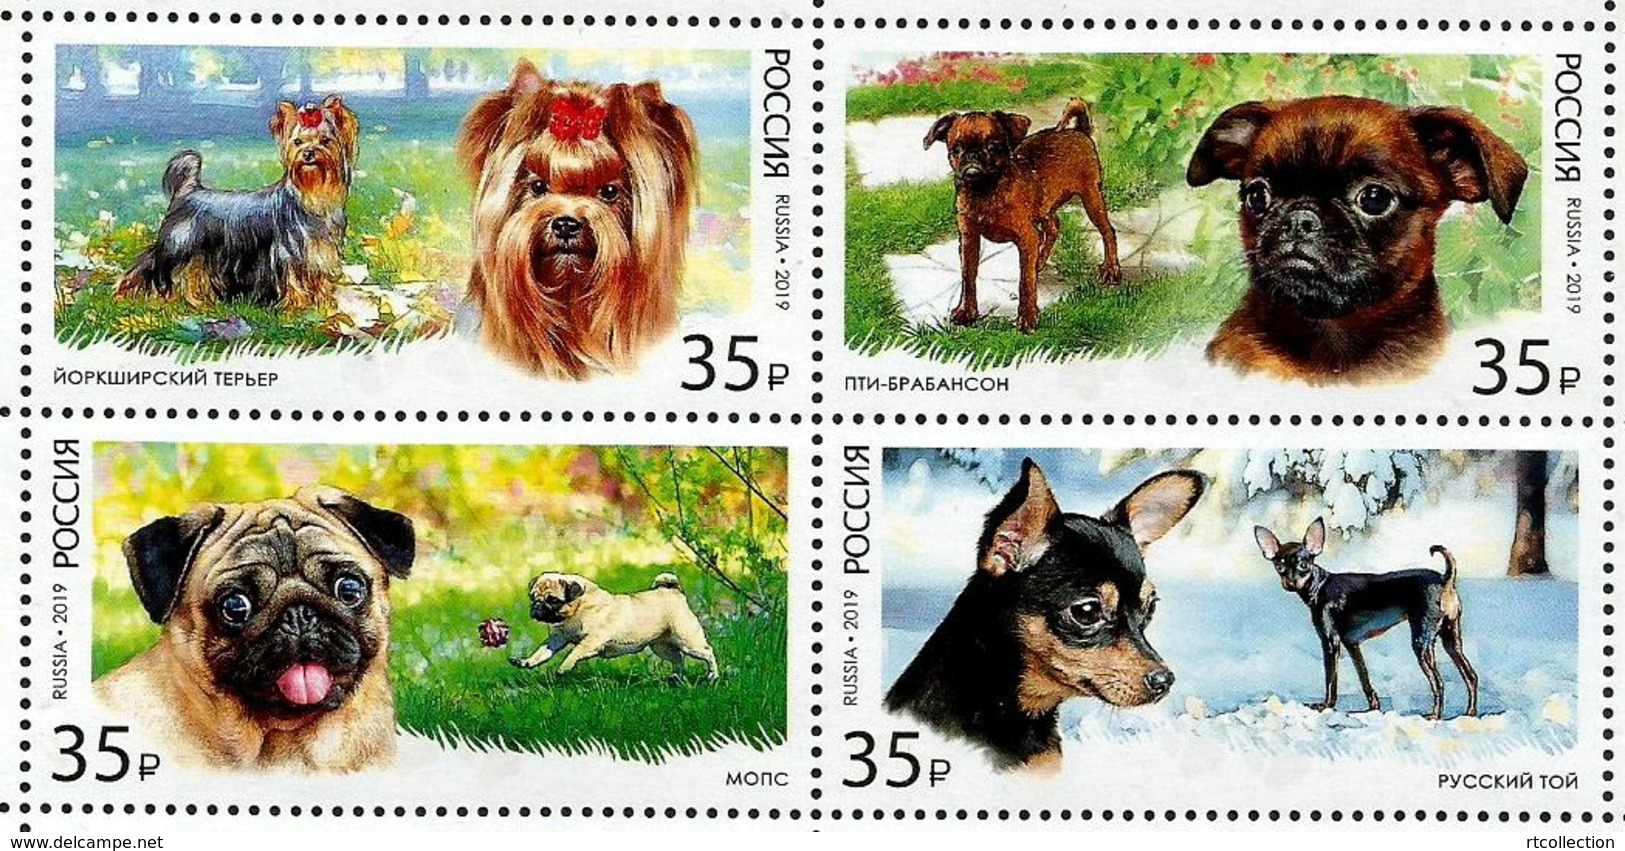 Russia 2019 Block Of 4 Decorative Toy Dogs Dog Animals Fauna Mammals Nature Animal Mammal Stamps MNH - Dogs